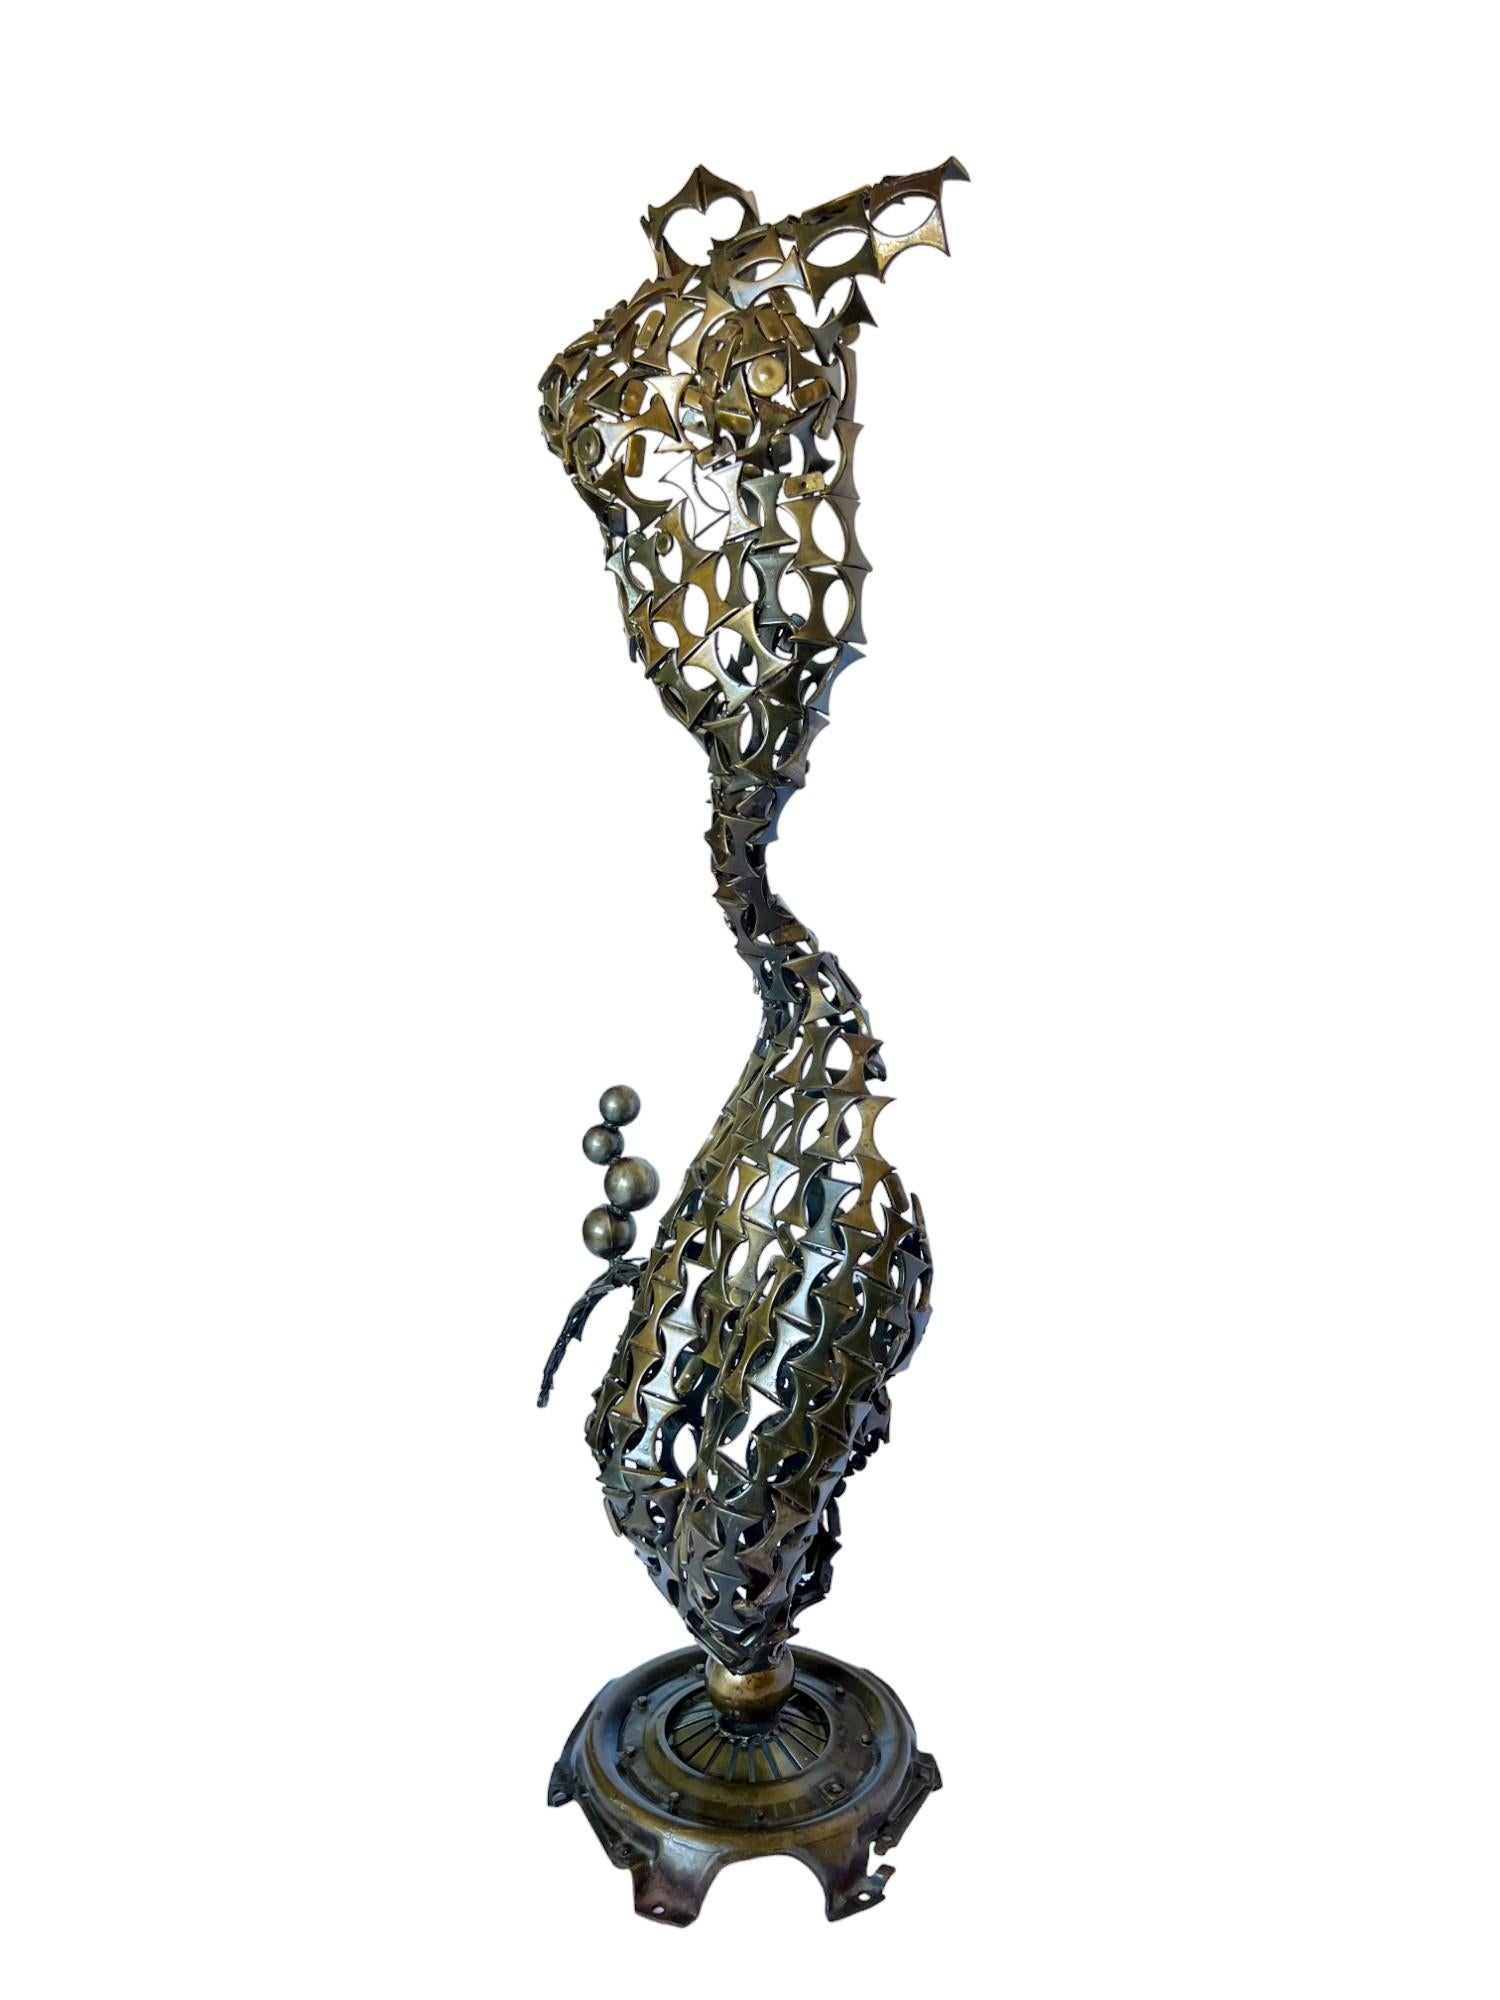 This alluring brutalist abstract mermaid floor sculpture has been hand skillfully crafted out of hundreds of individually welded steel pieces of various shapes. Its intriguing 360 degree design features a torso form upper body, an elongated and